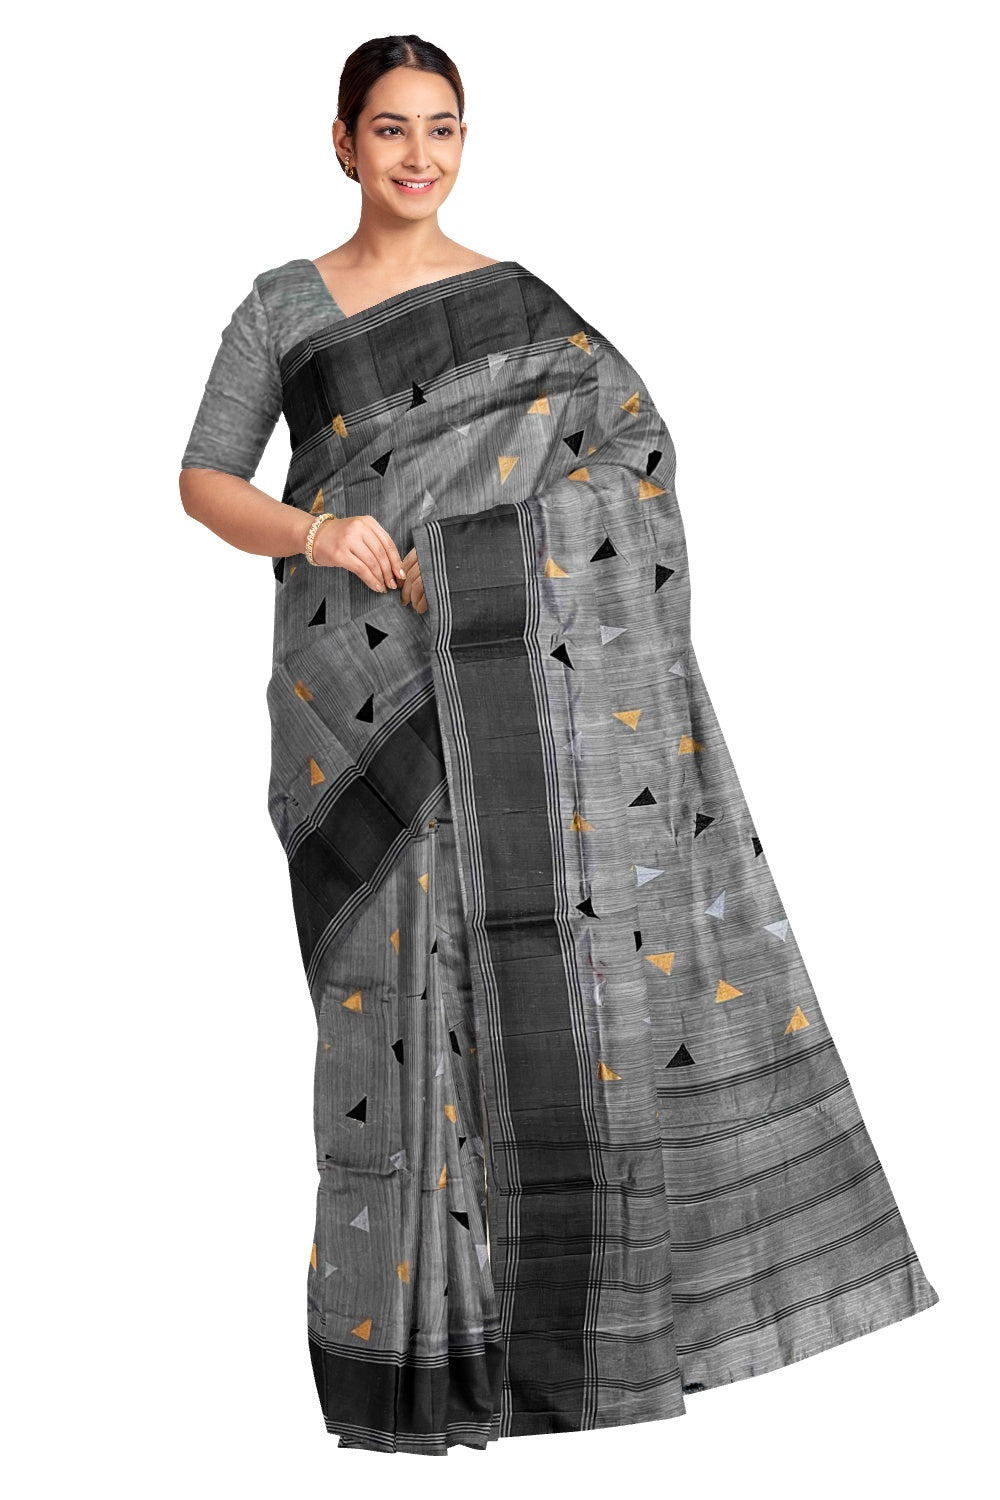 Southloom Grey Semi Sik Designer Saree with Butta Works and Tassels